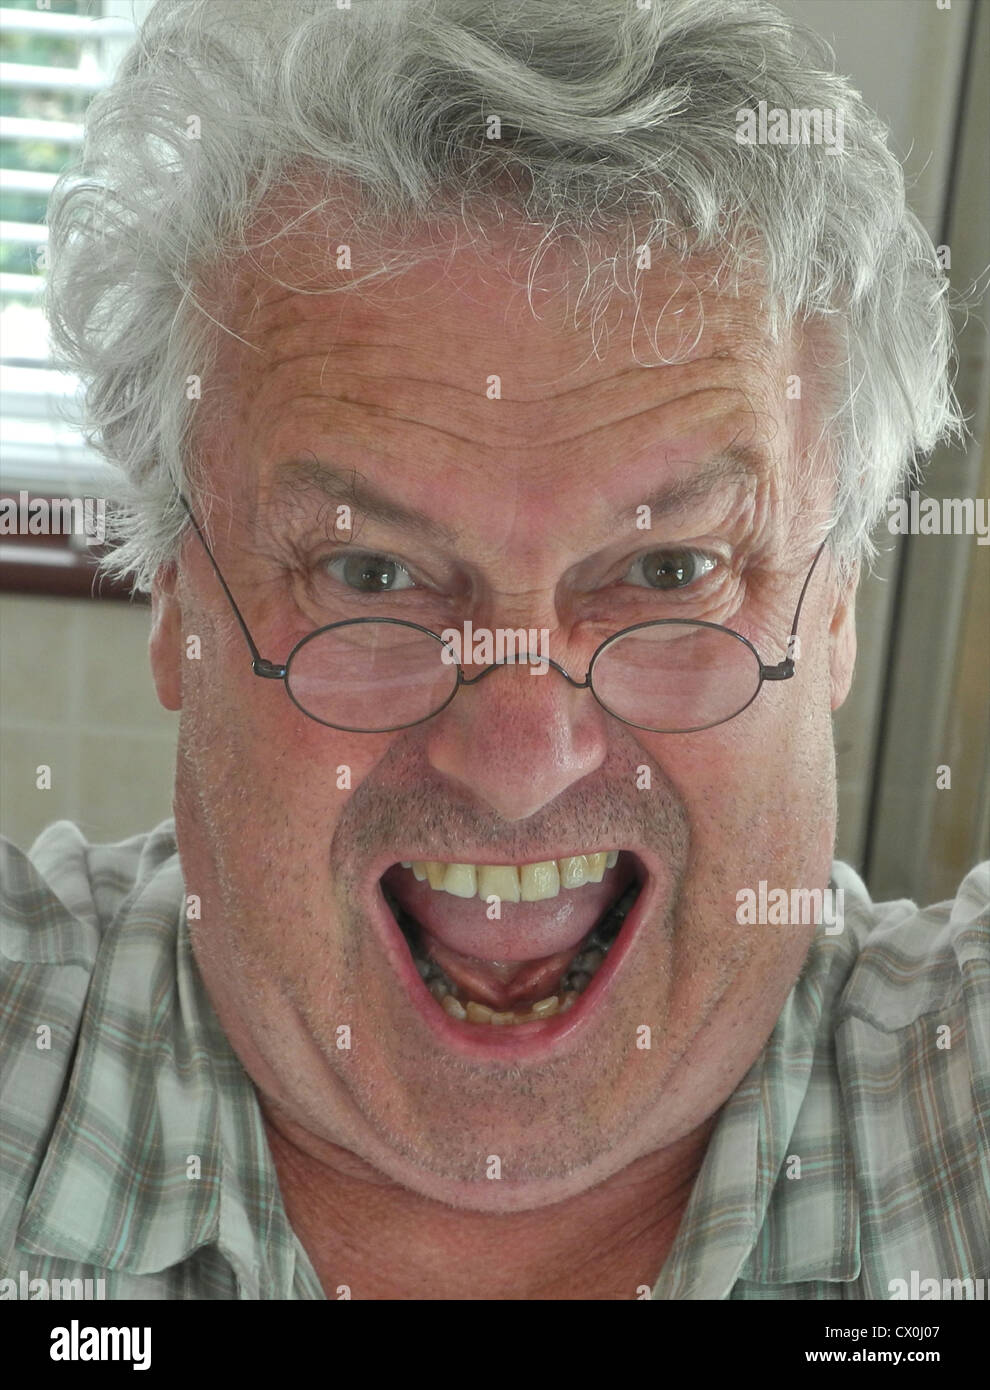 An ugly grumpy old man - fully model released images for any use Stock Photo